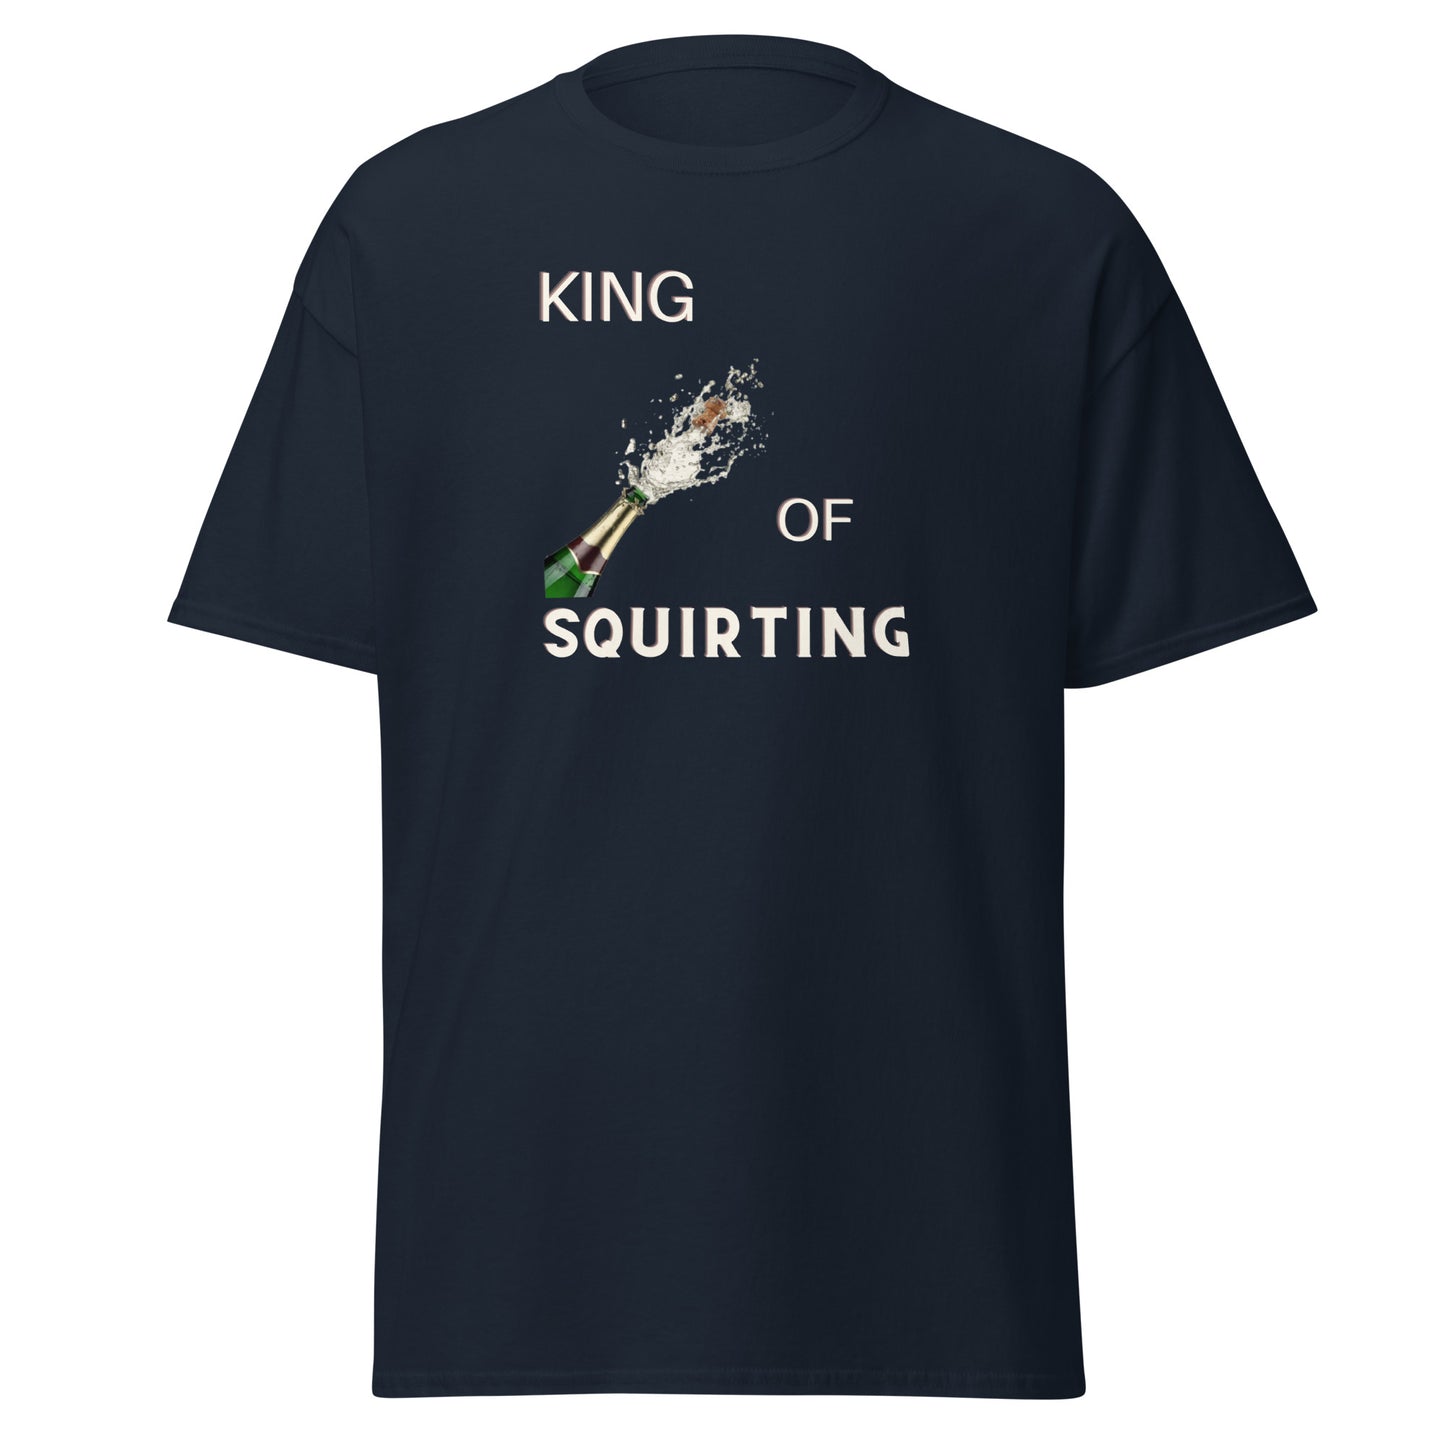 KING OF SQUIRTING